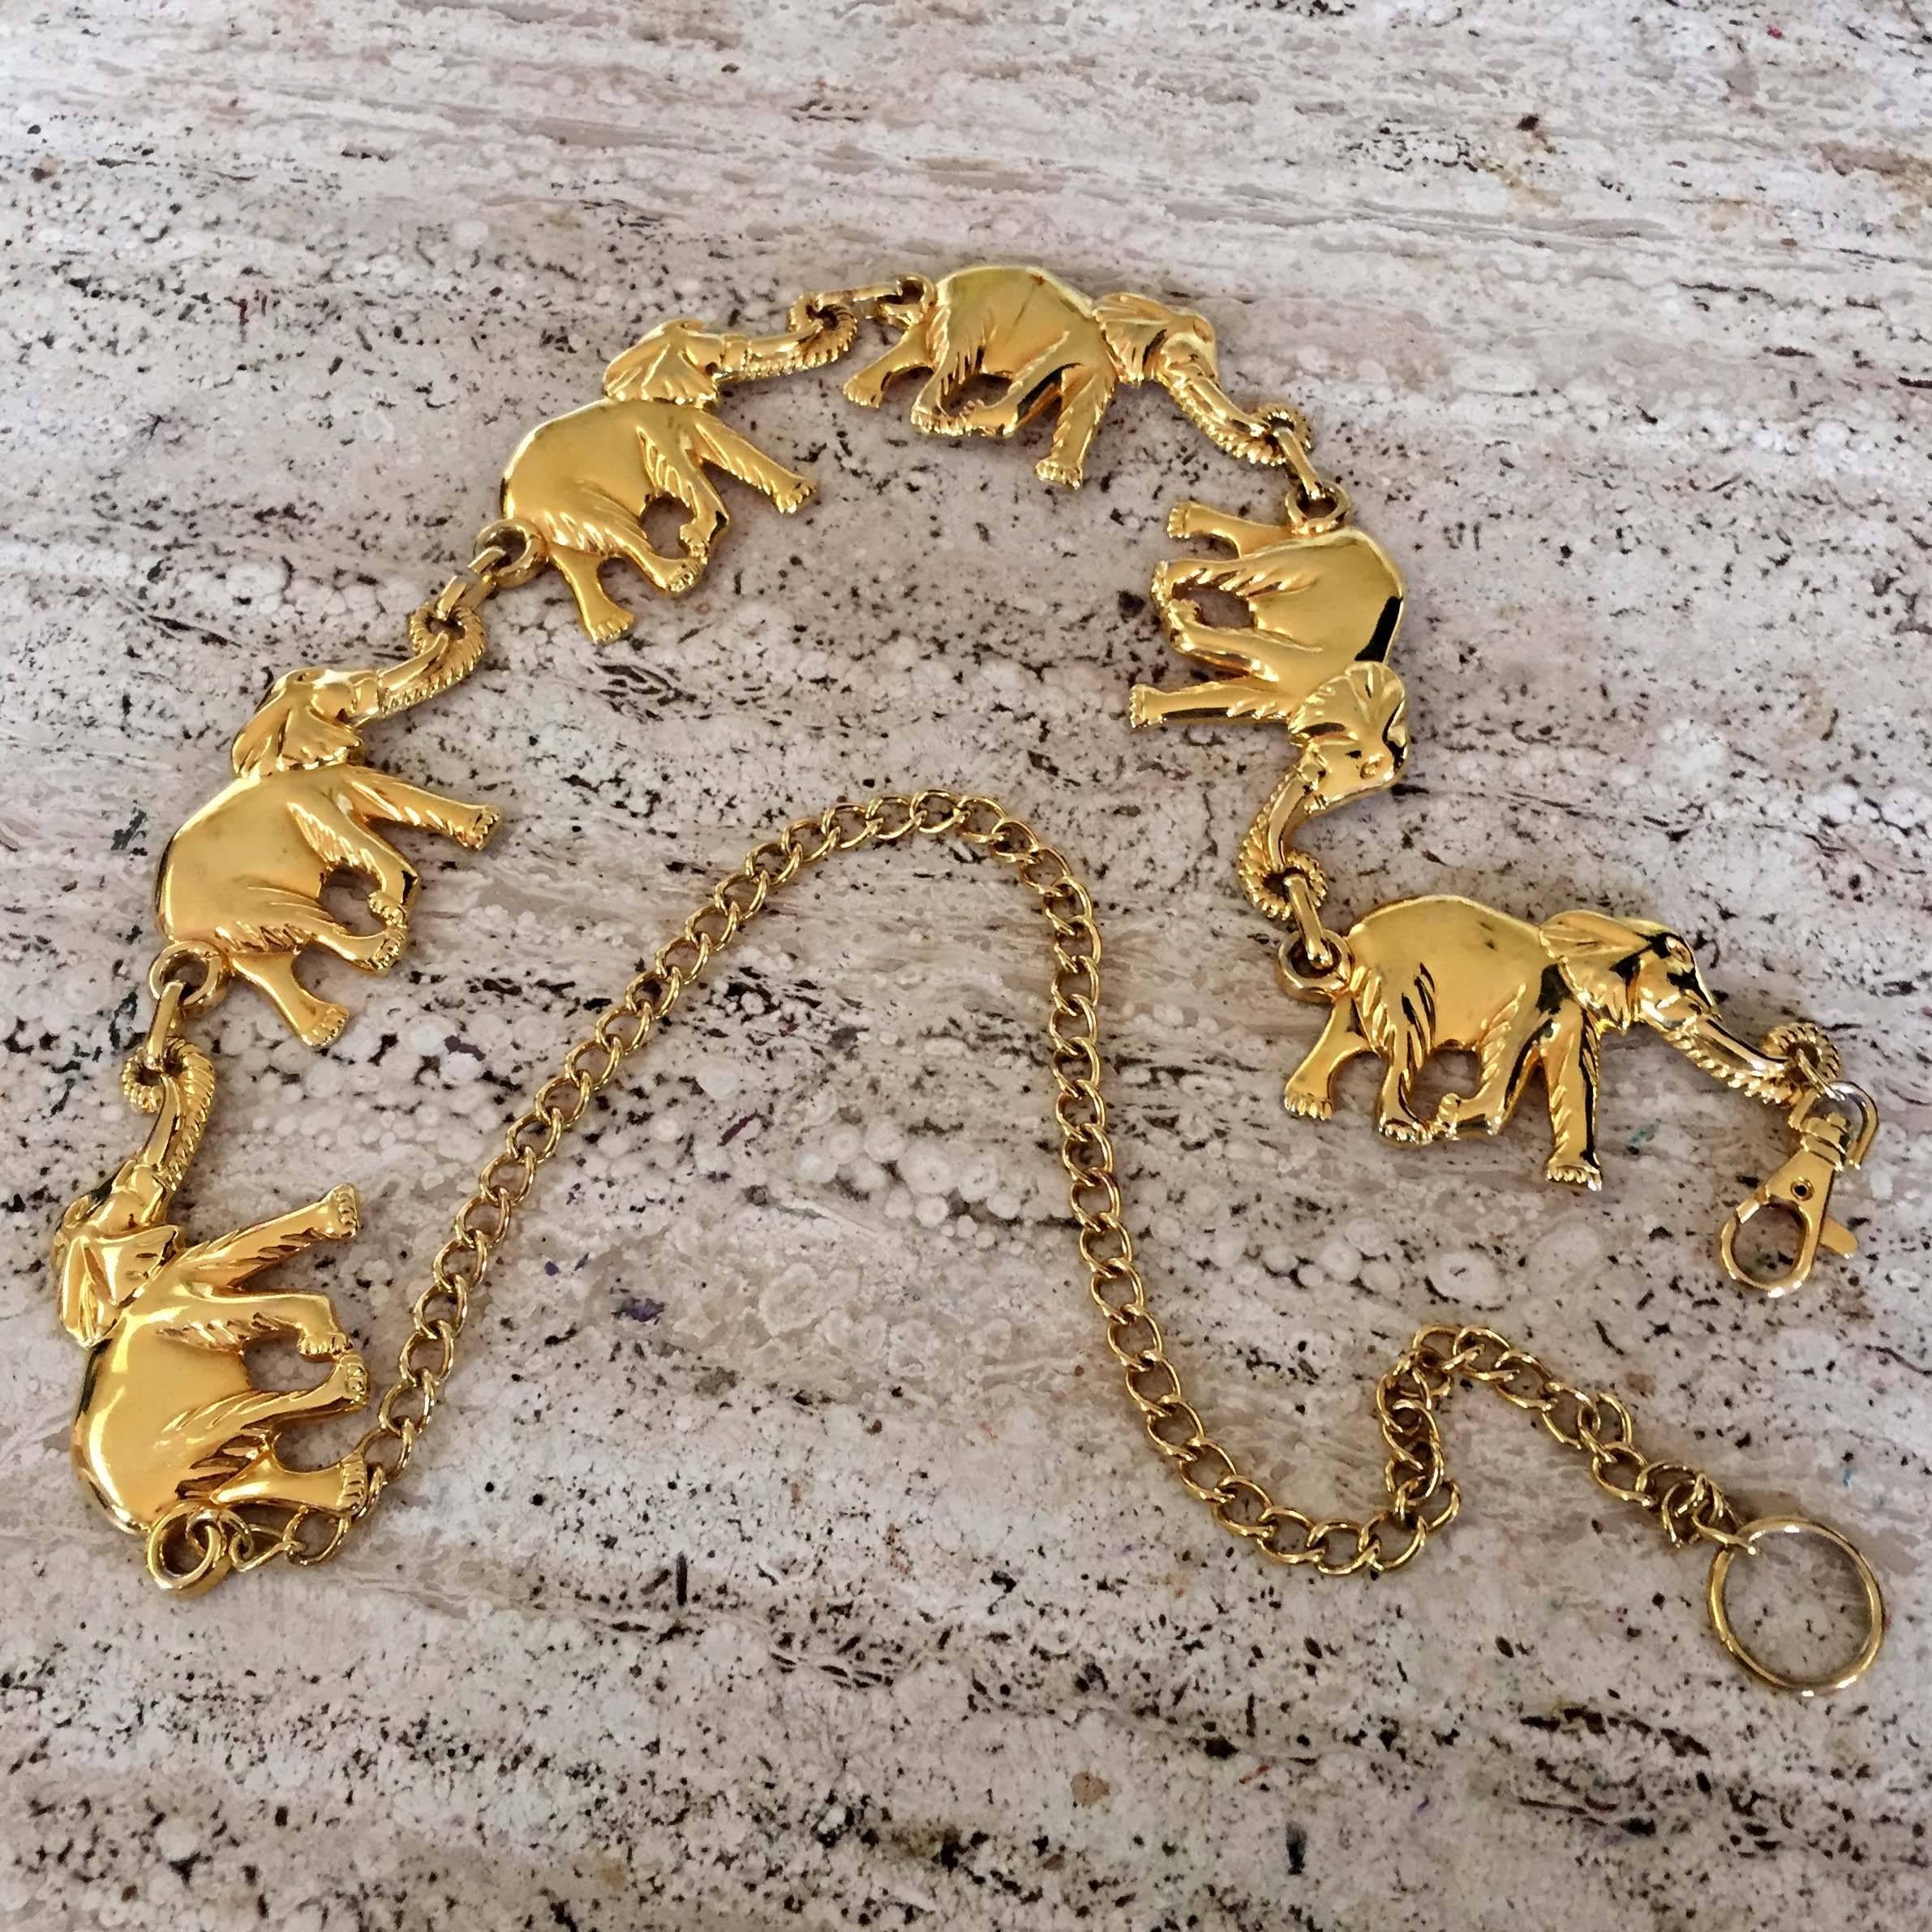 Vintage Heavy Gold Elephant belt
Circa: 1970
Material: Metal, gold plated
Size: 42L total, with 6 of 4